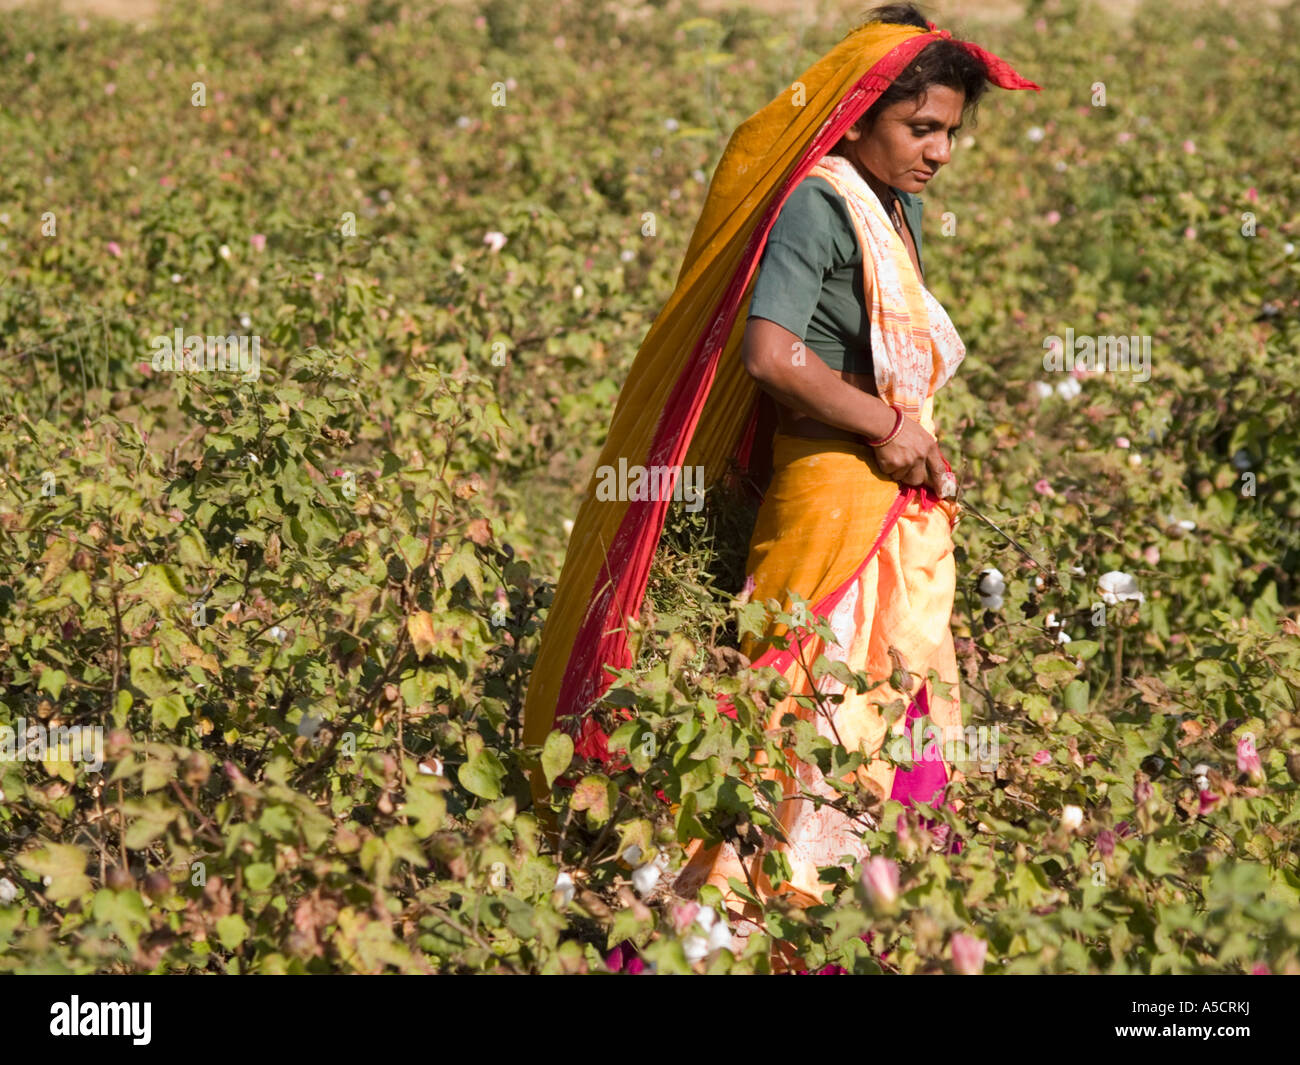 Farm workers in a field of cotton to be harvested Stock Photo